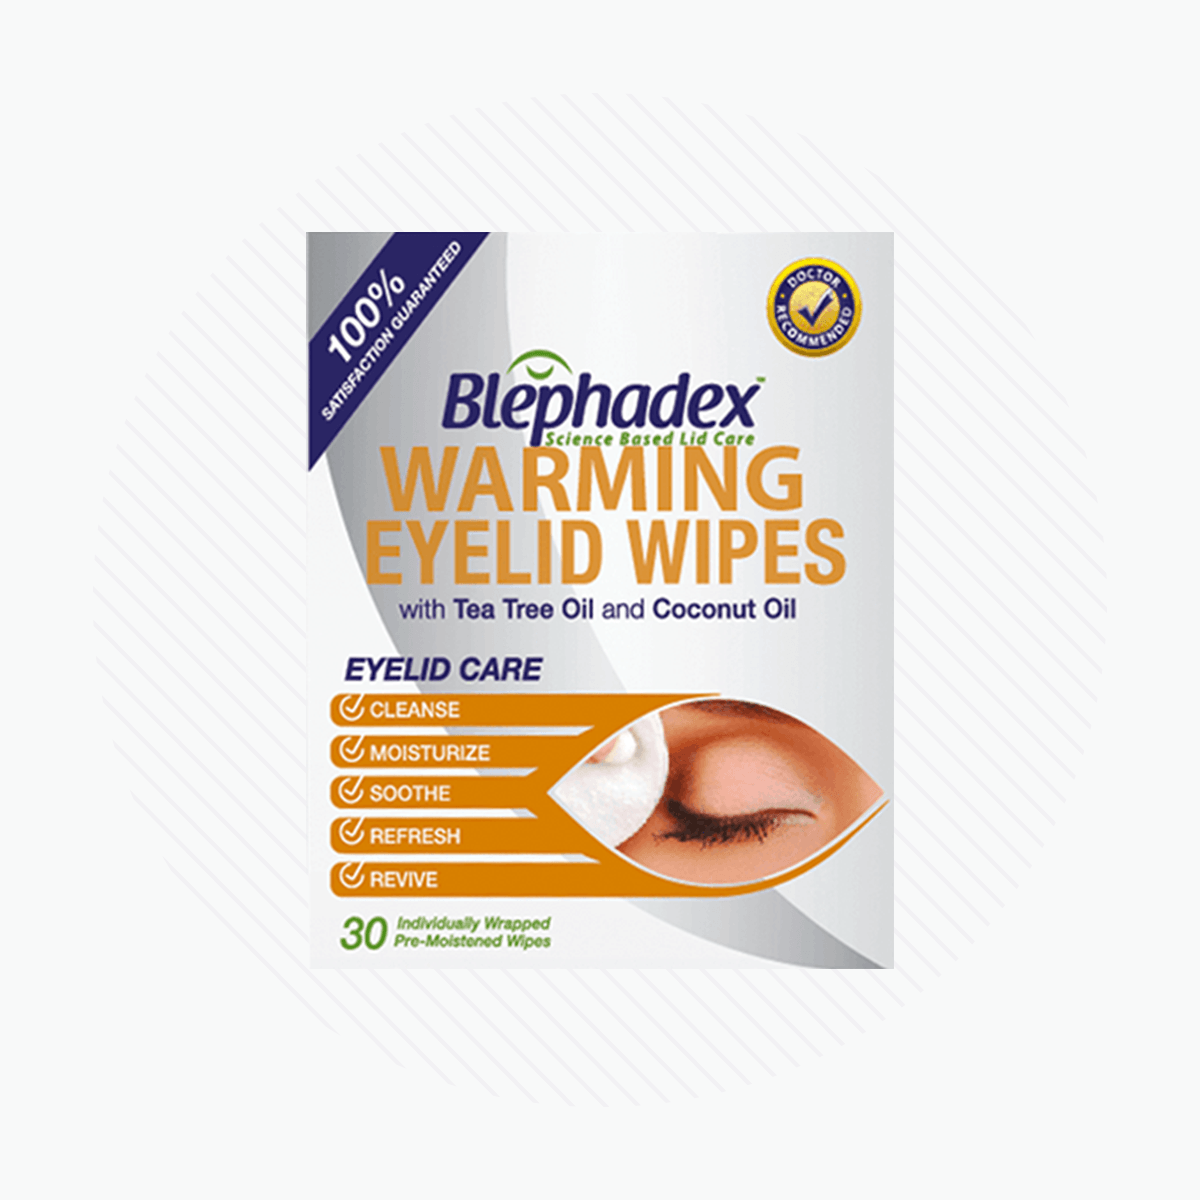 Blephadex Warming Eyelid Wipes (1 month Box of 30) - DryEye Rescue Store